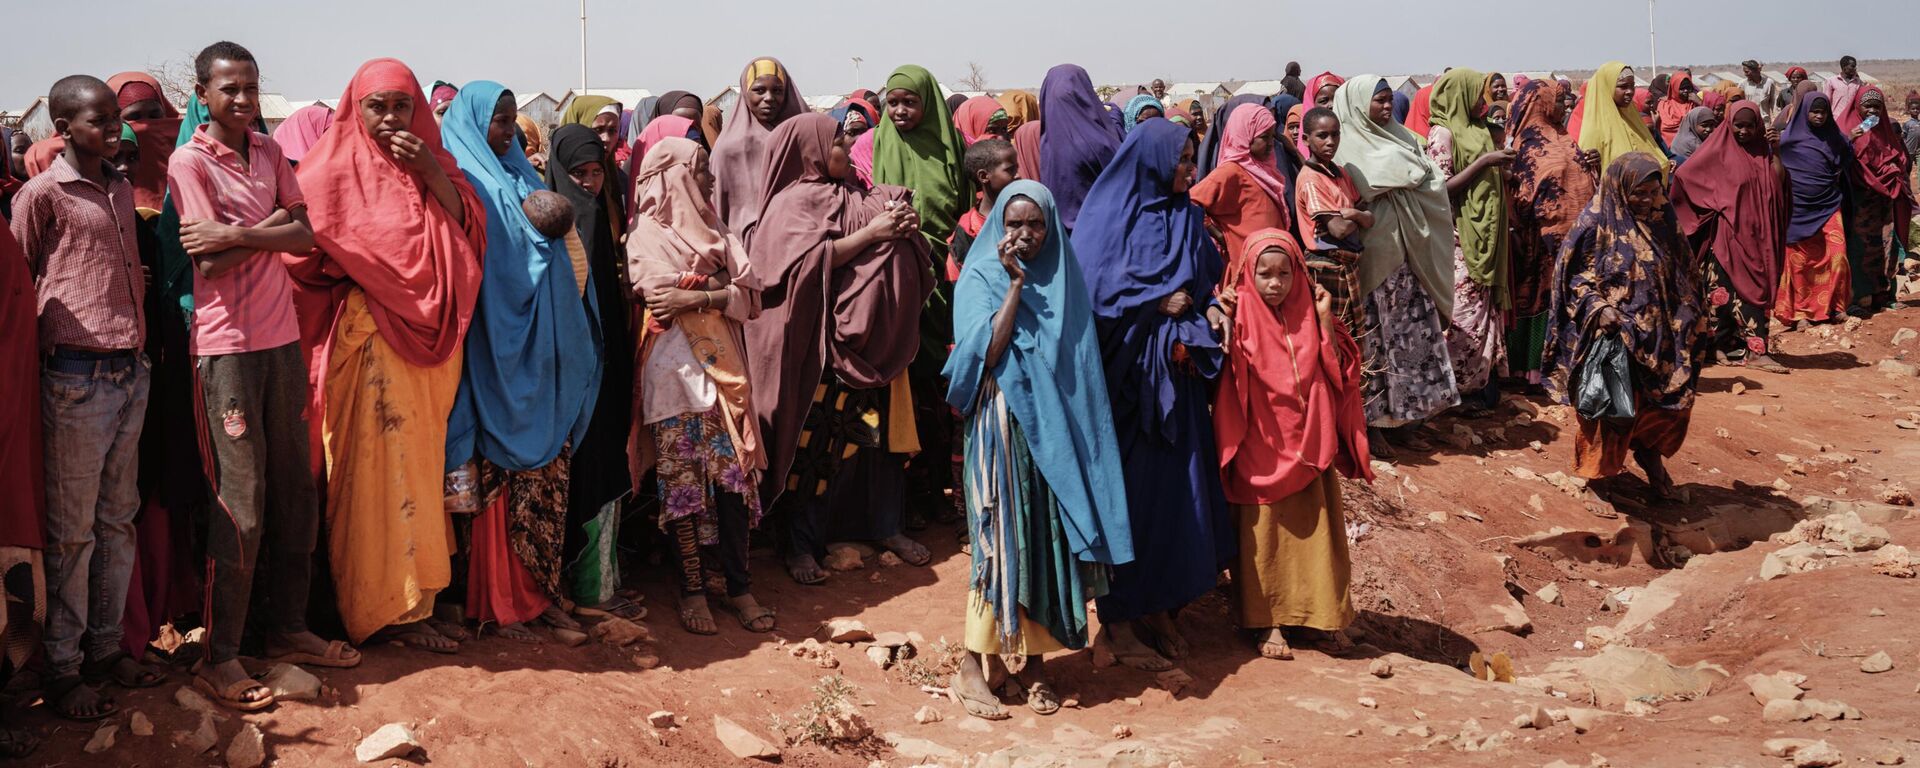 People wait for food distributions and health services at a camp for internally displaced persons (IDPs) in Baidoa, Somalia, on February 14, 2022 - Sputnik International, 1920, 06.10.2022